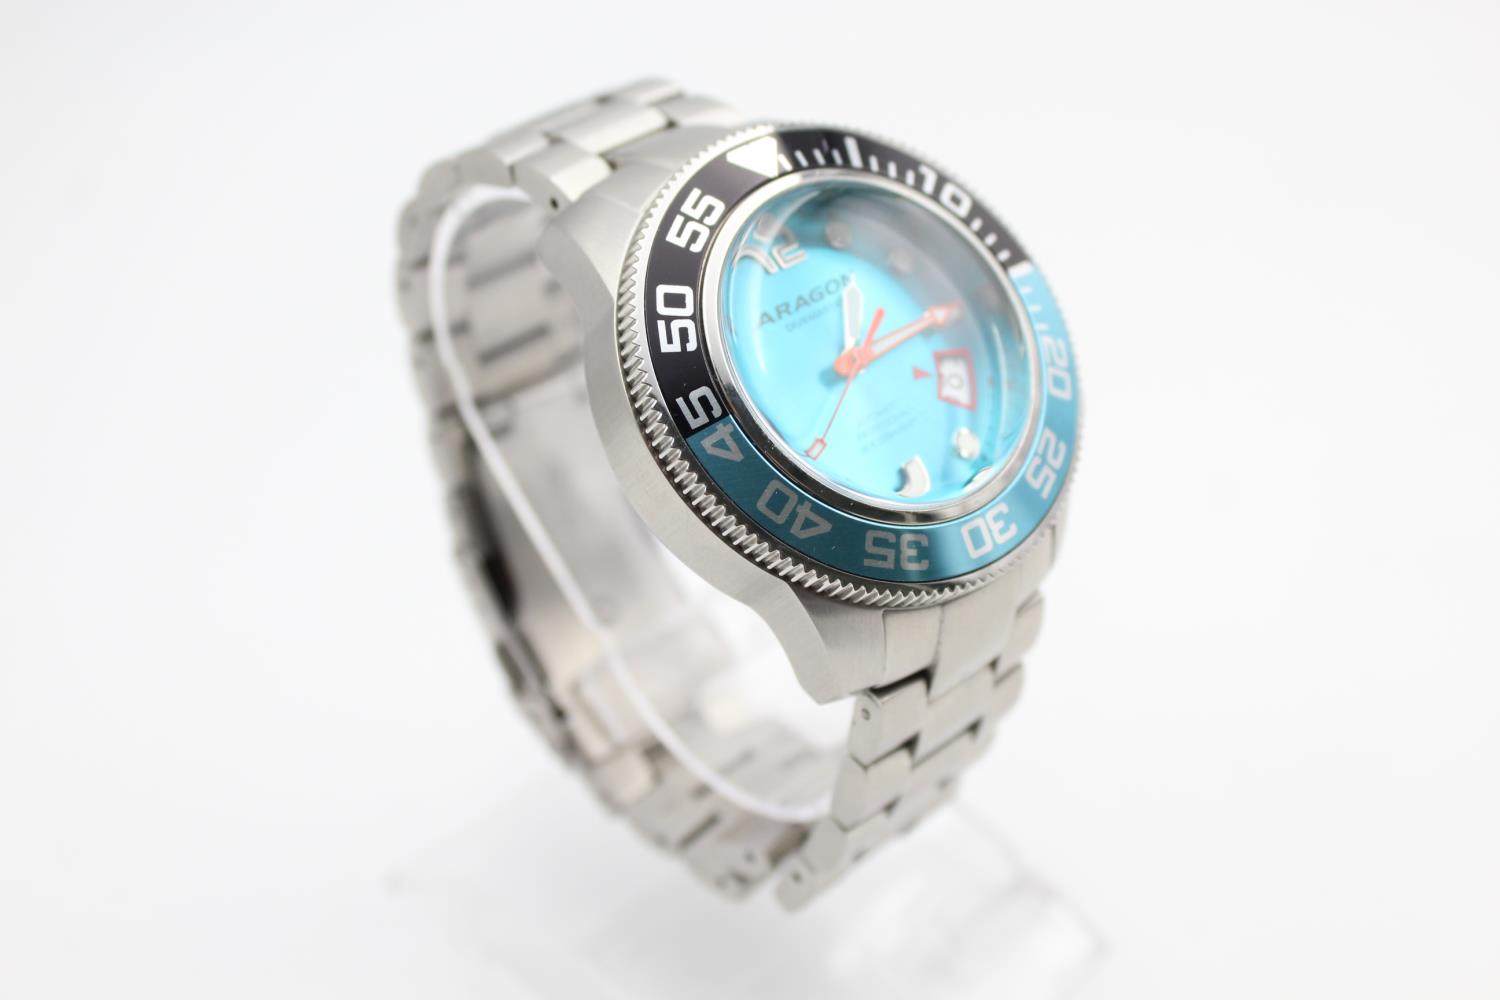 Gents ARAGON Divemaster Mechanical Divers WRISTWATCH Automatic WORKING